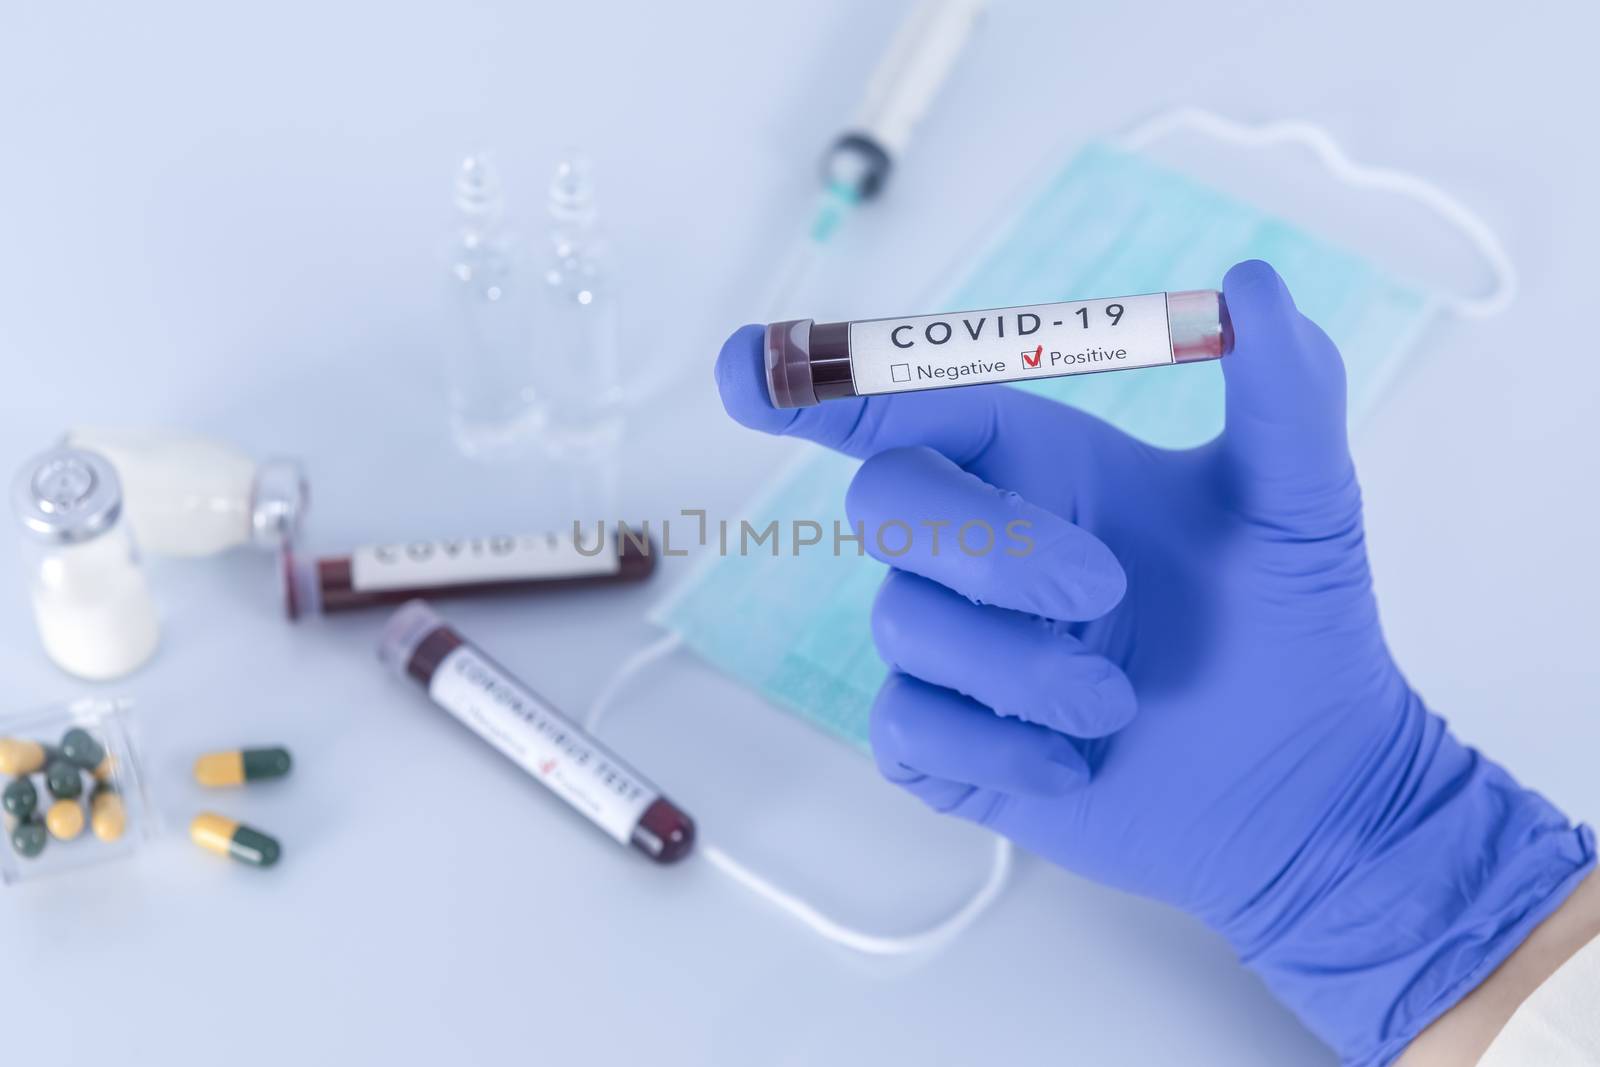 Analyst hand with protective gloves holding COVID 19 Coronavirus test blood. Virus test and research concept. Focus on test blood.